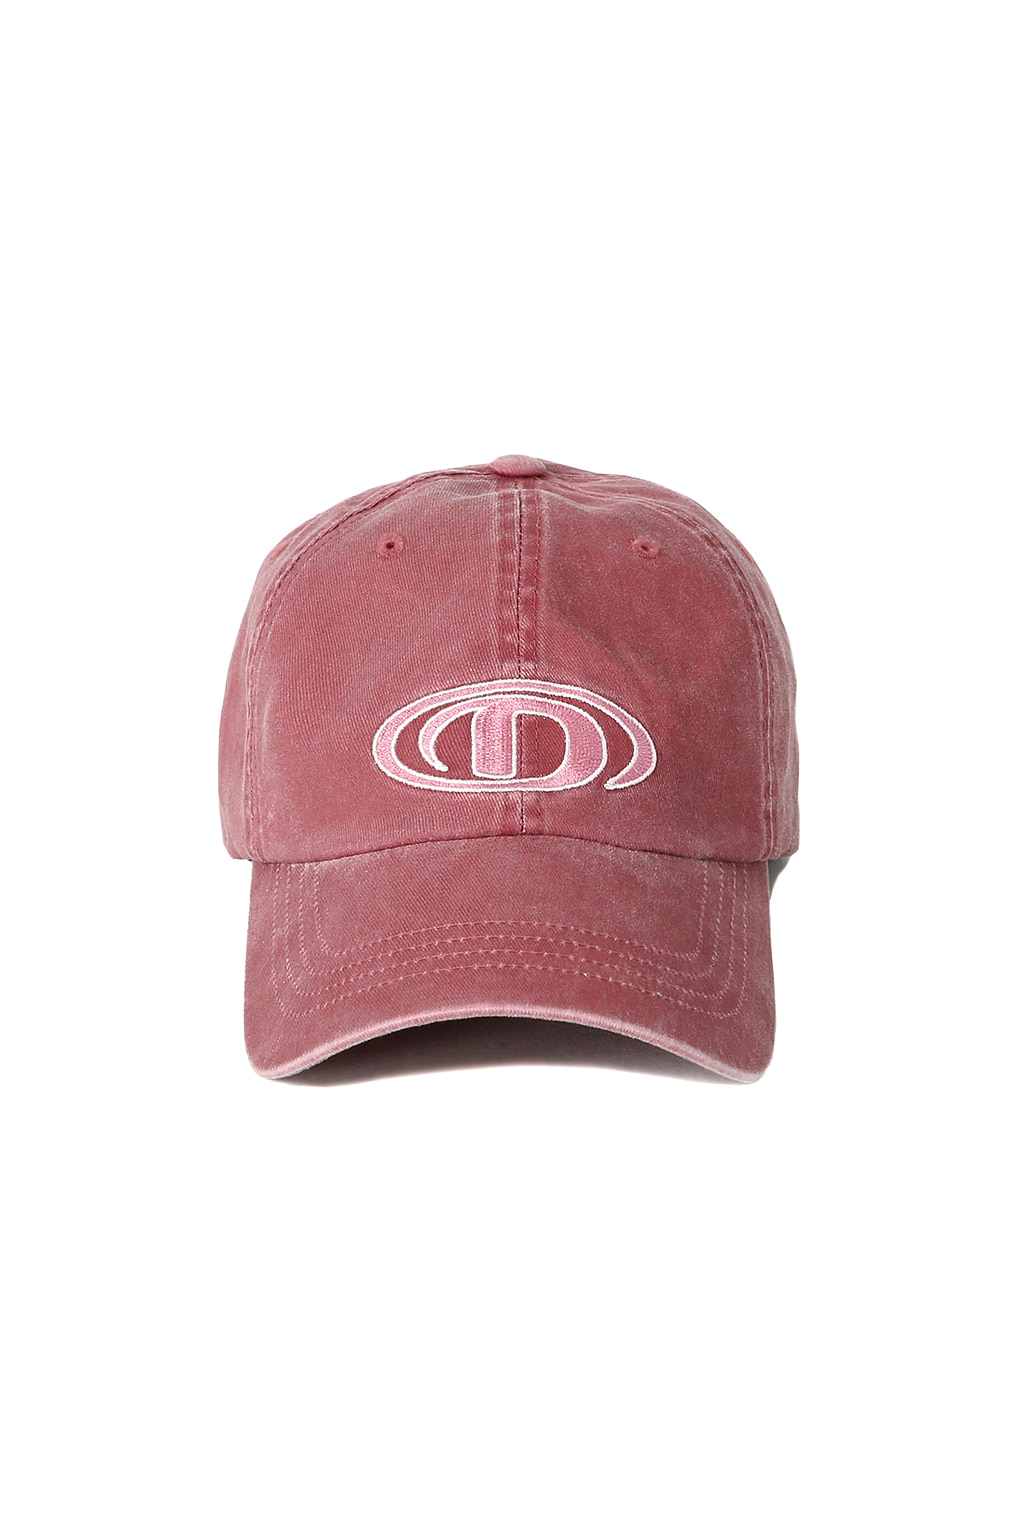 WASHED ICONIC LOGO CAP [RED]